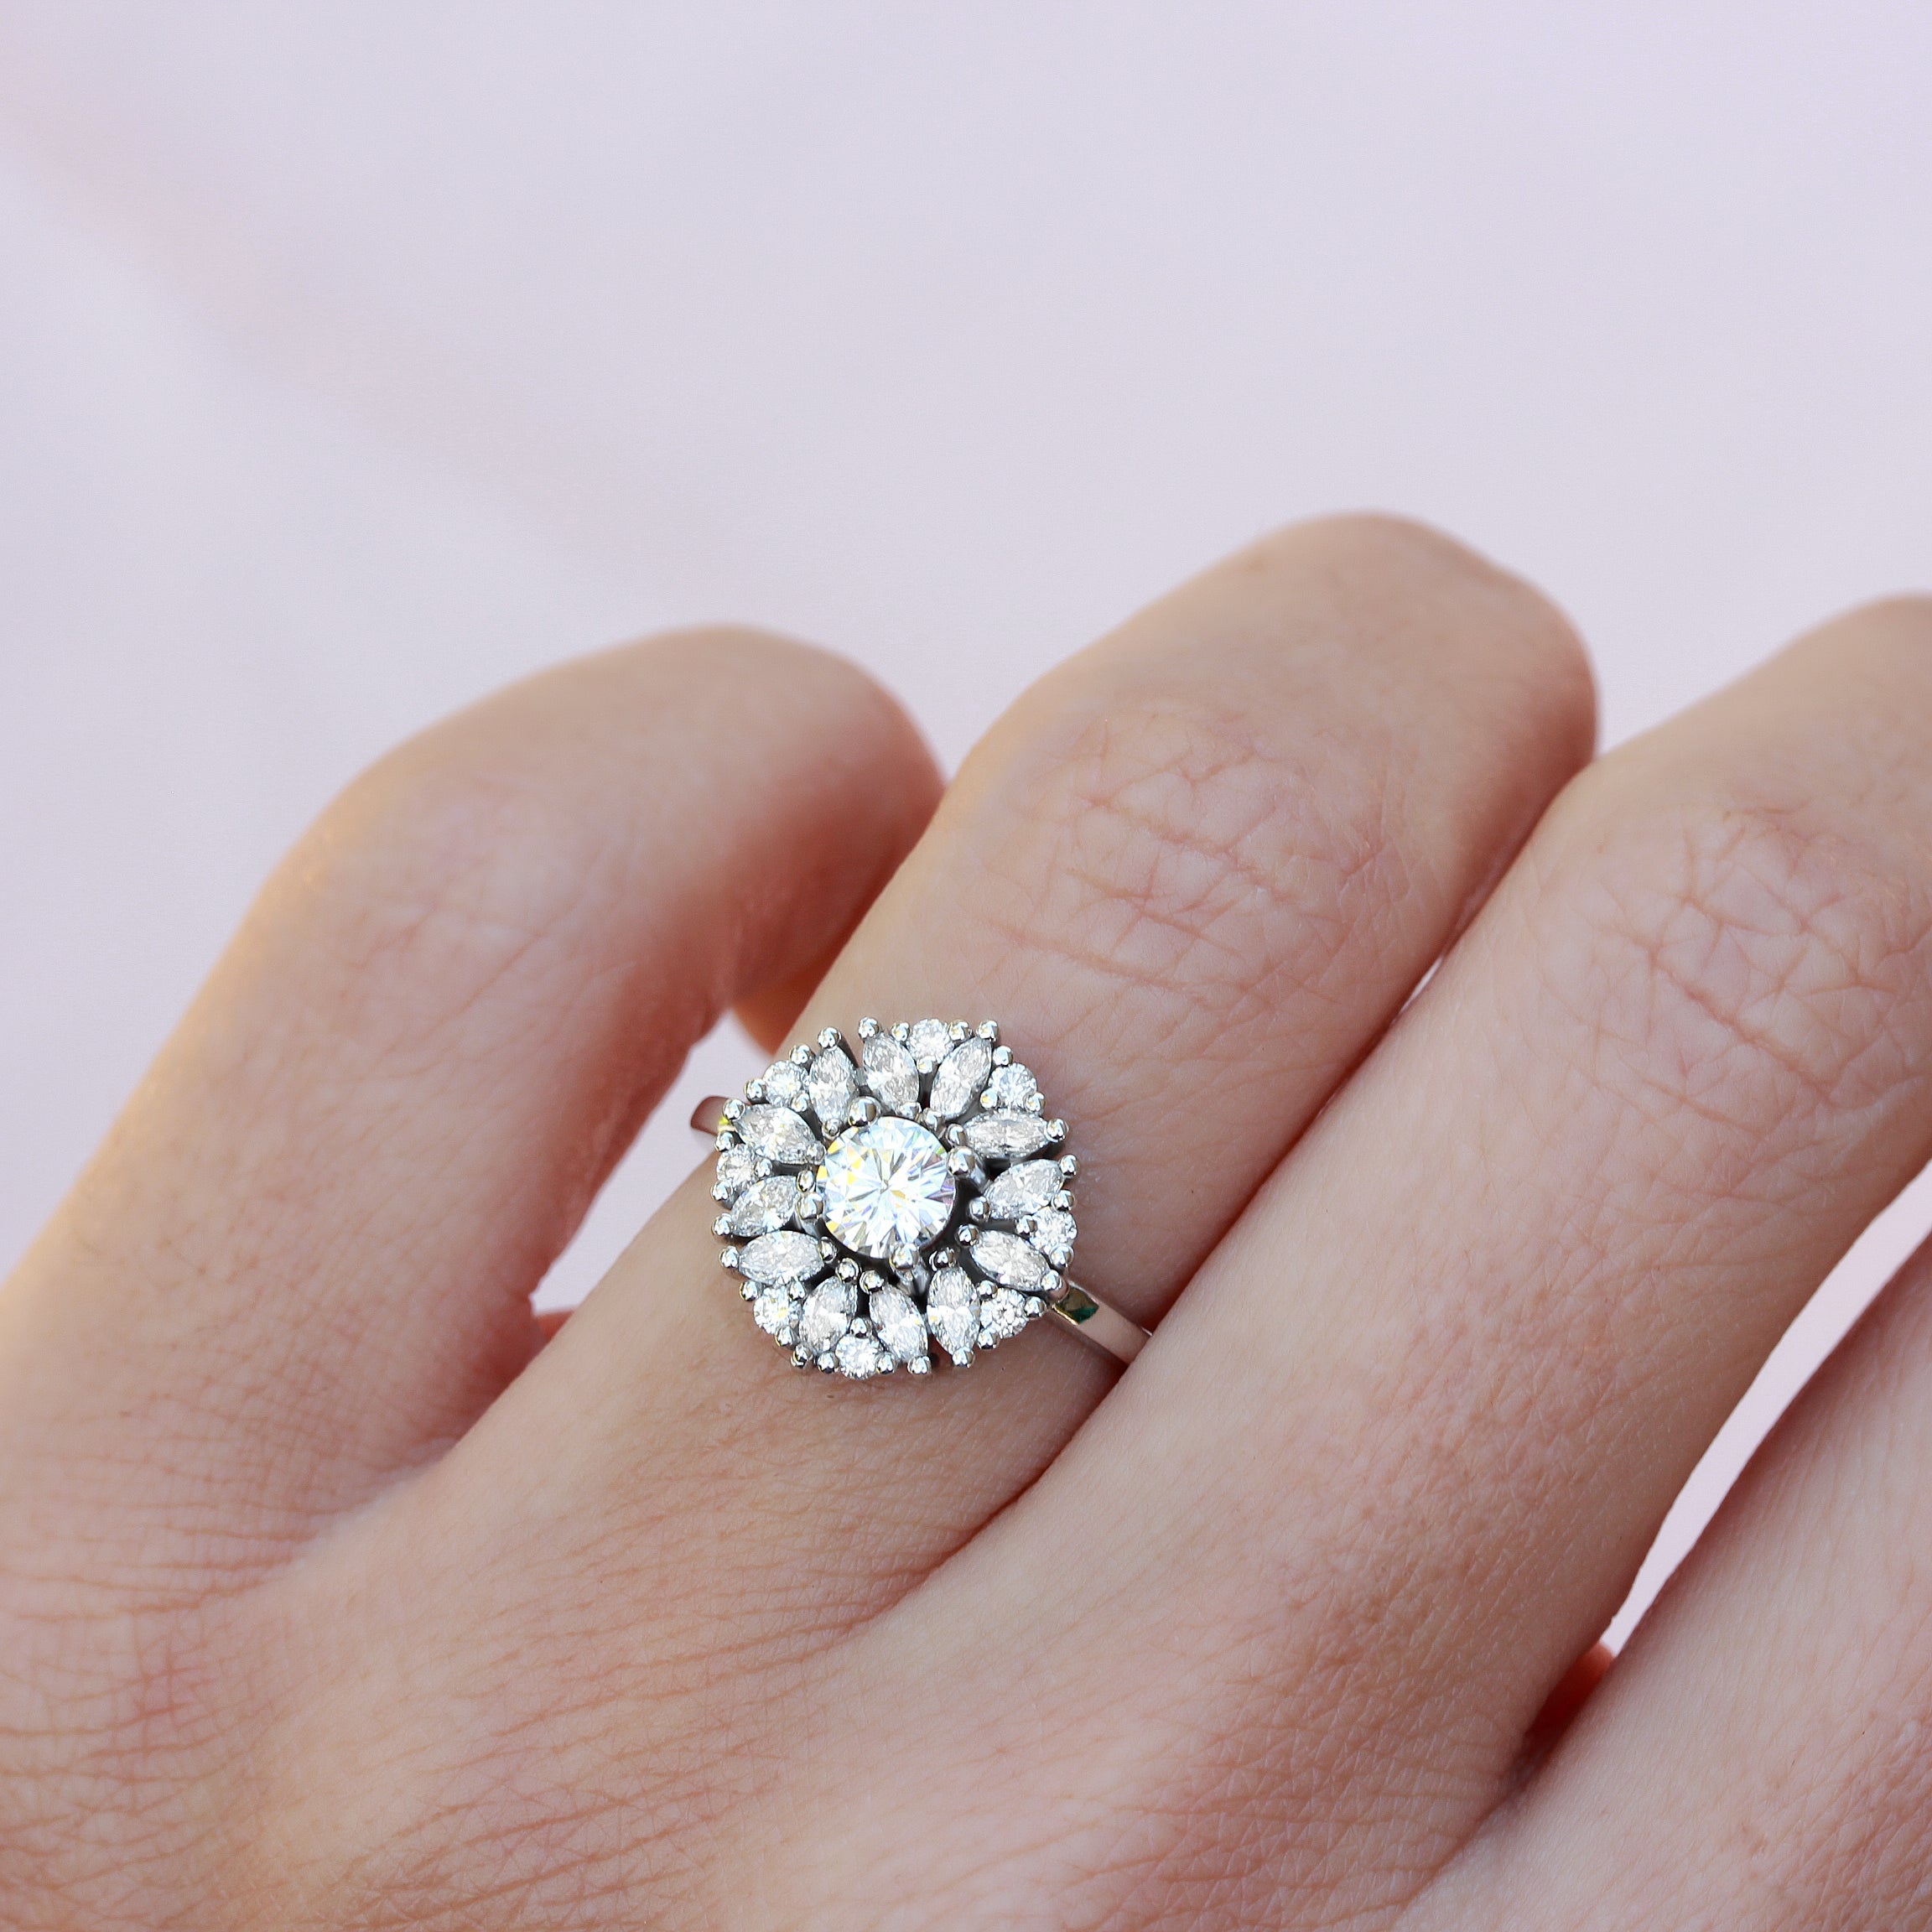 Delicate round cut art deco diamond engagement ring, Harper - Ready to ship in 14K white gold & size 6.5 ♥